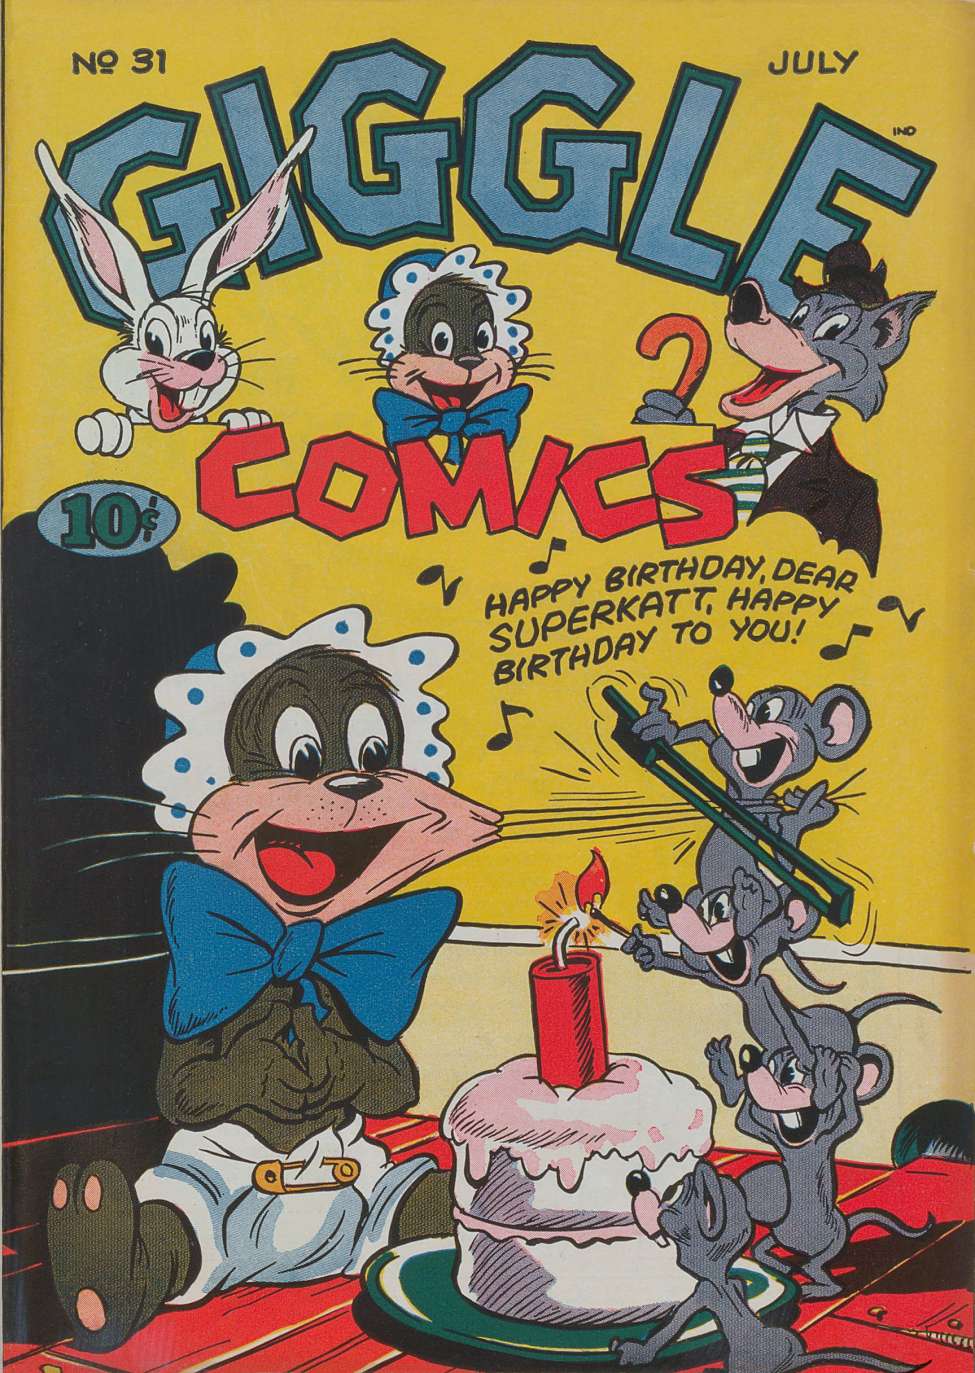 Book Cover For Giggle Comics 31